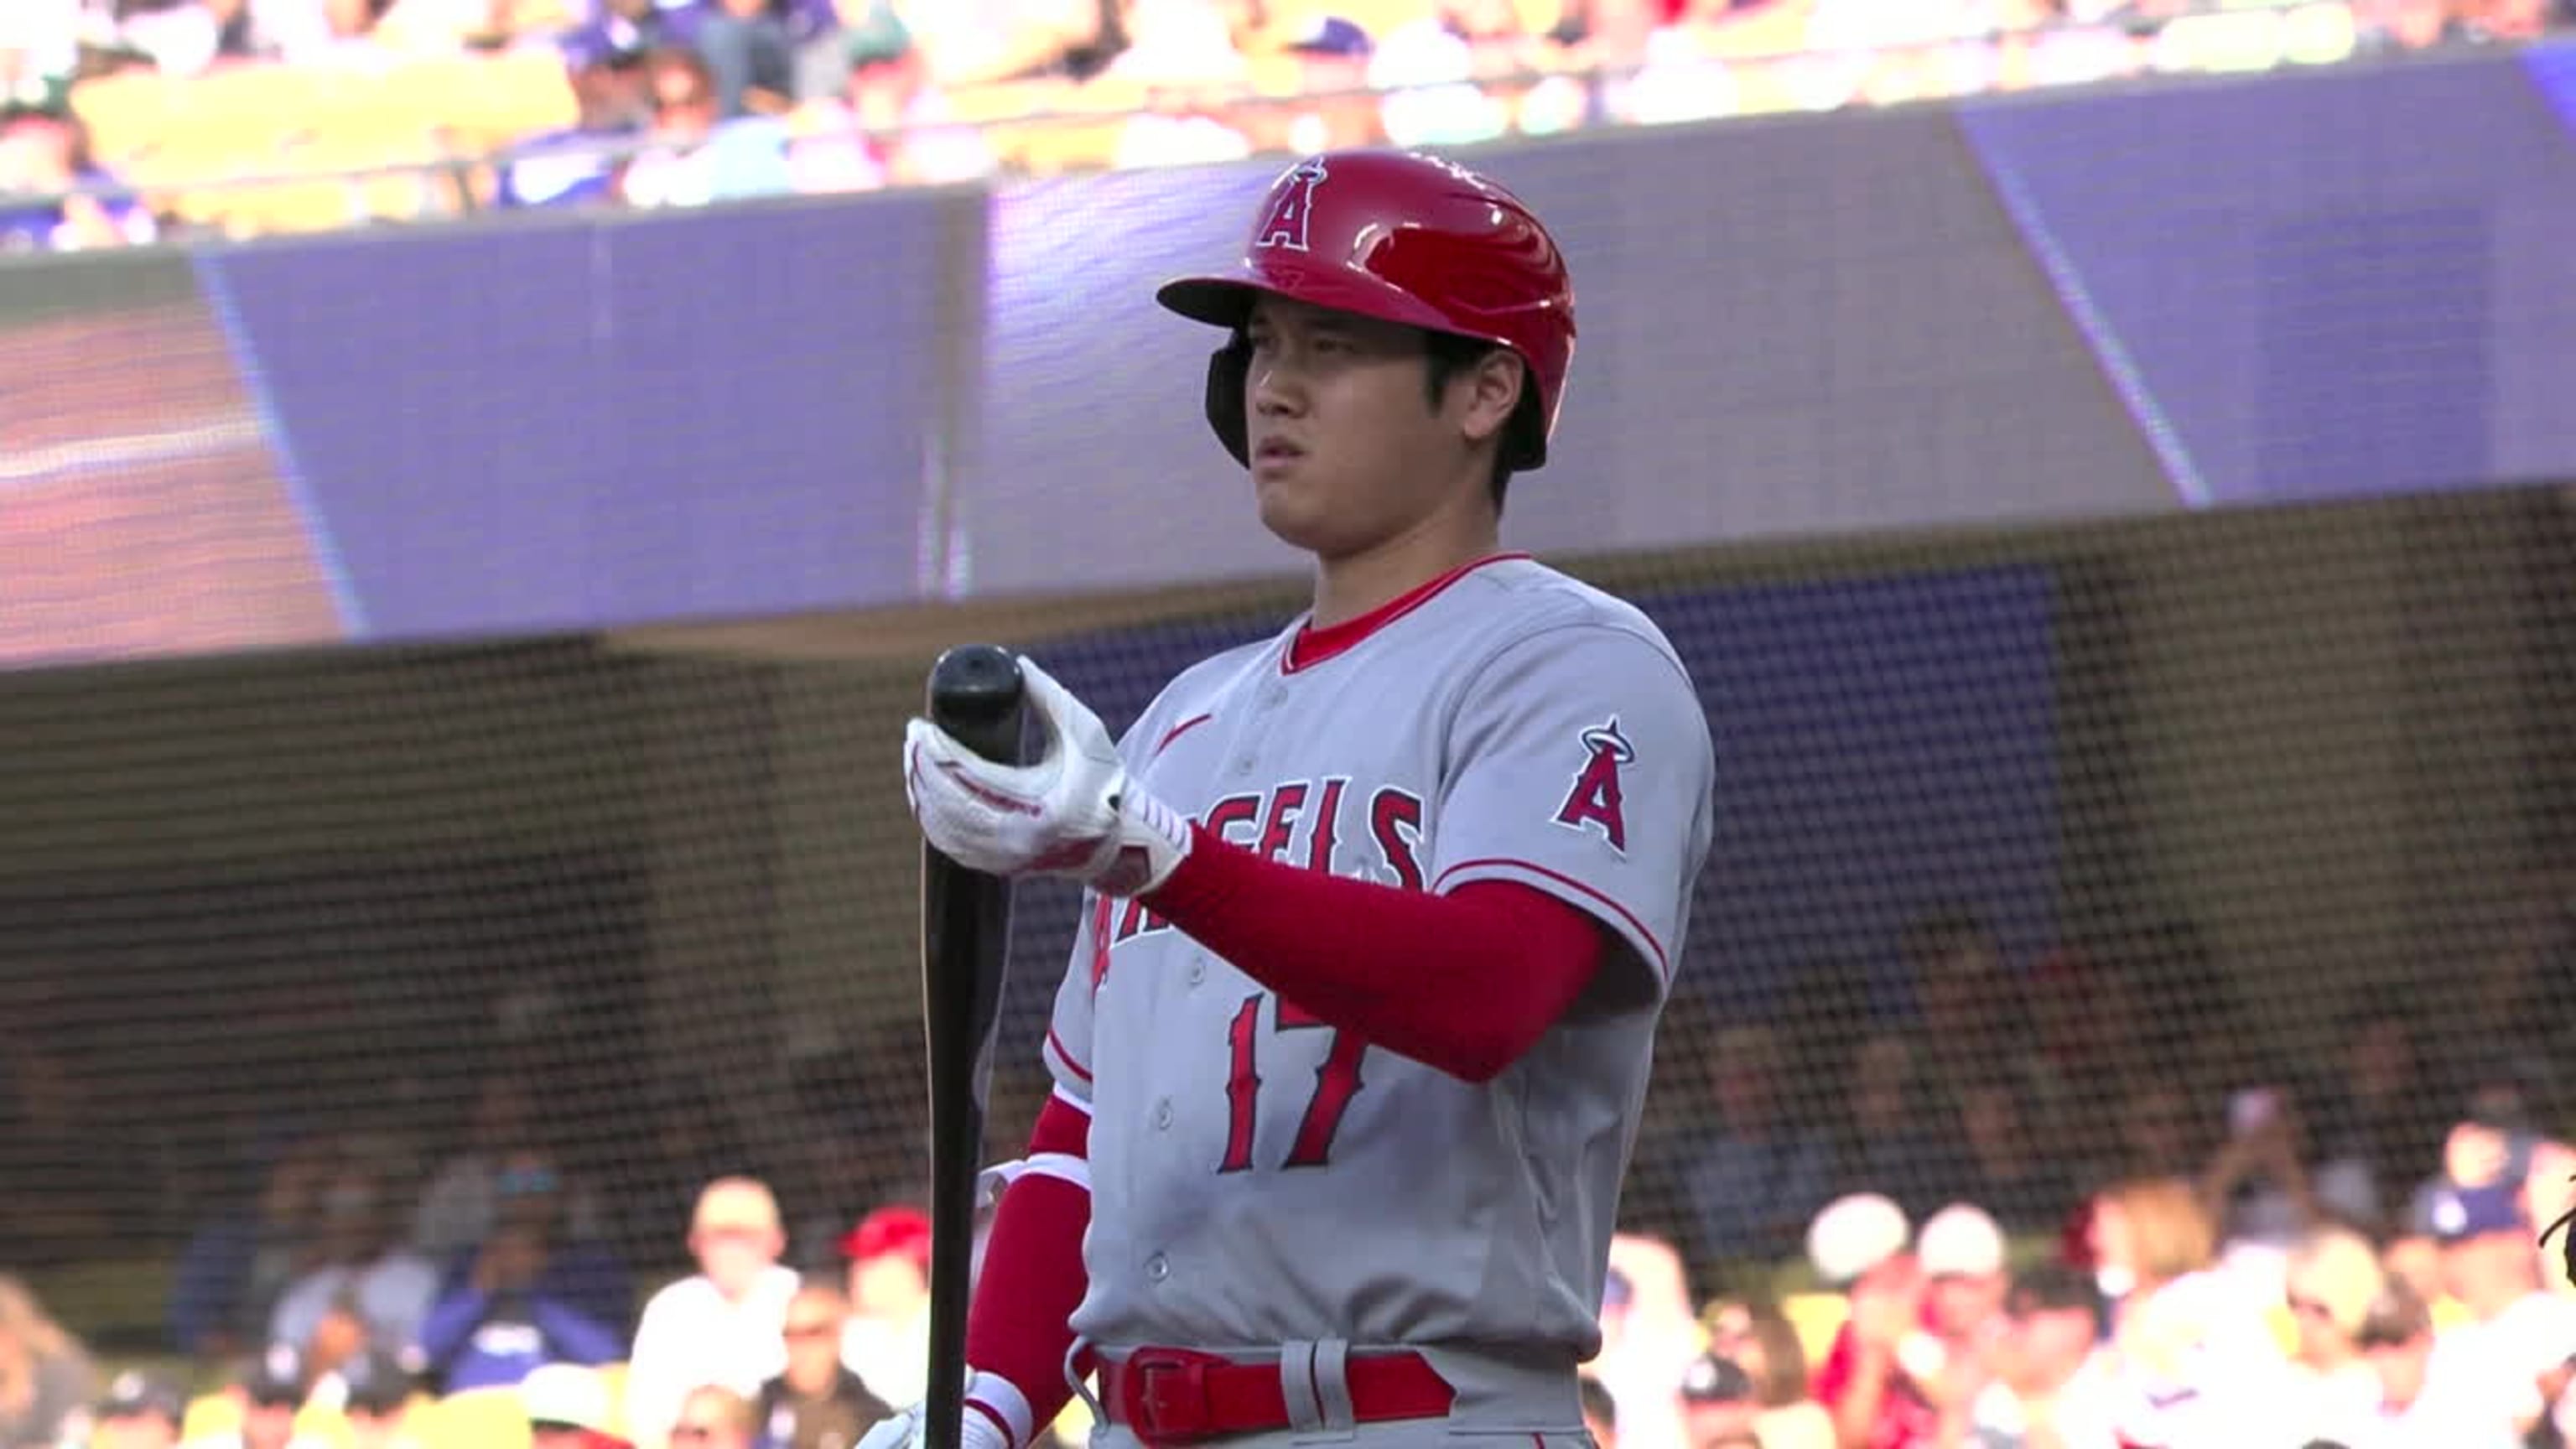 Shohei Ohtani is the jackpot Mariners fans can dream about